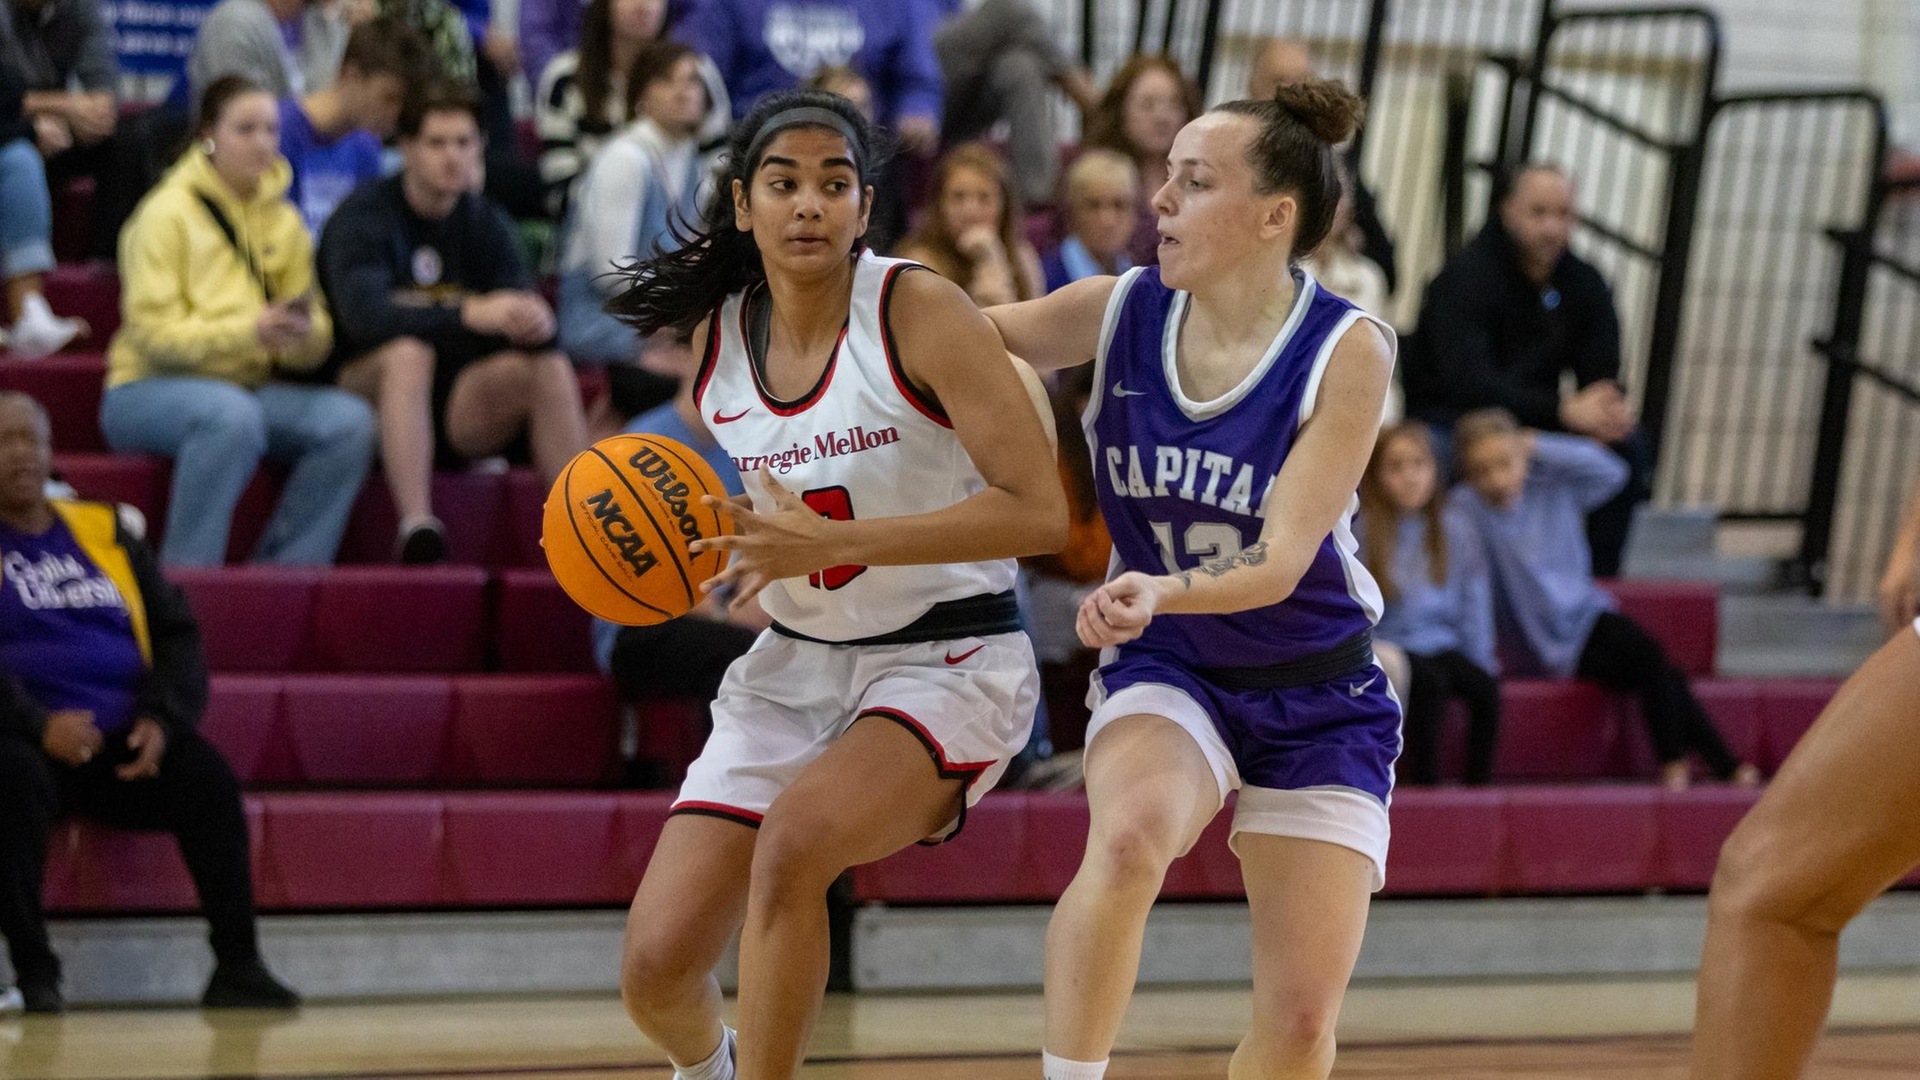 women's basketball player wearing a white uniform looks to pass or shoot with a defender wearing a purple uniform near her left shoulder